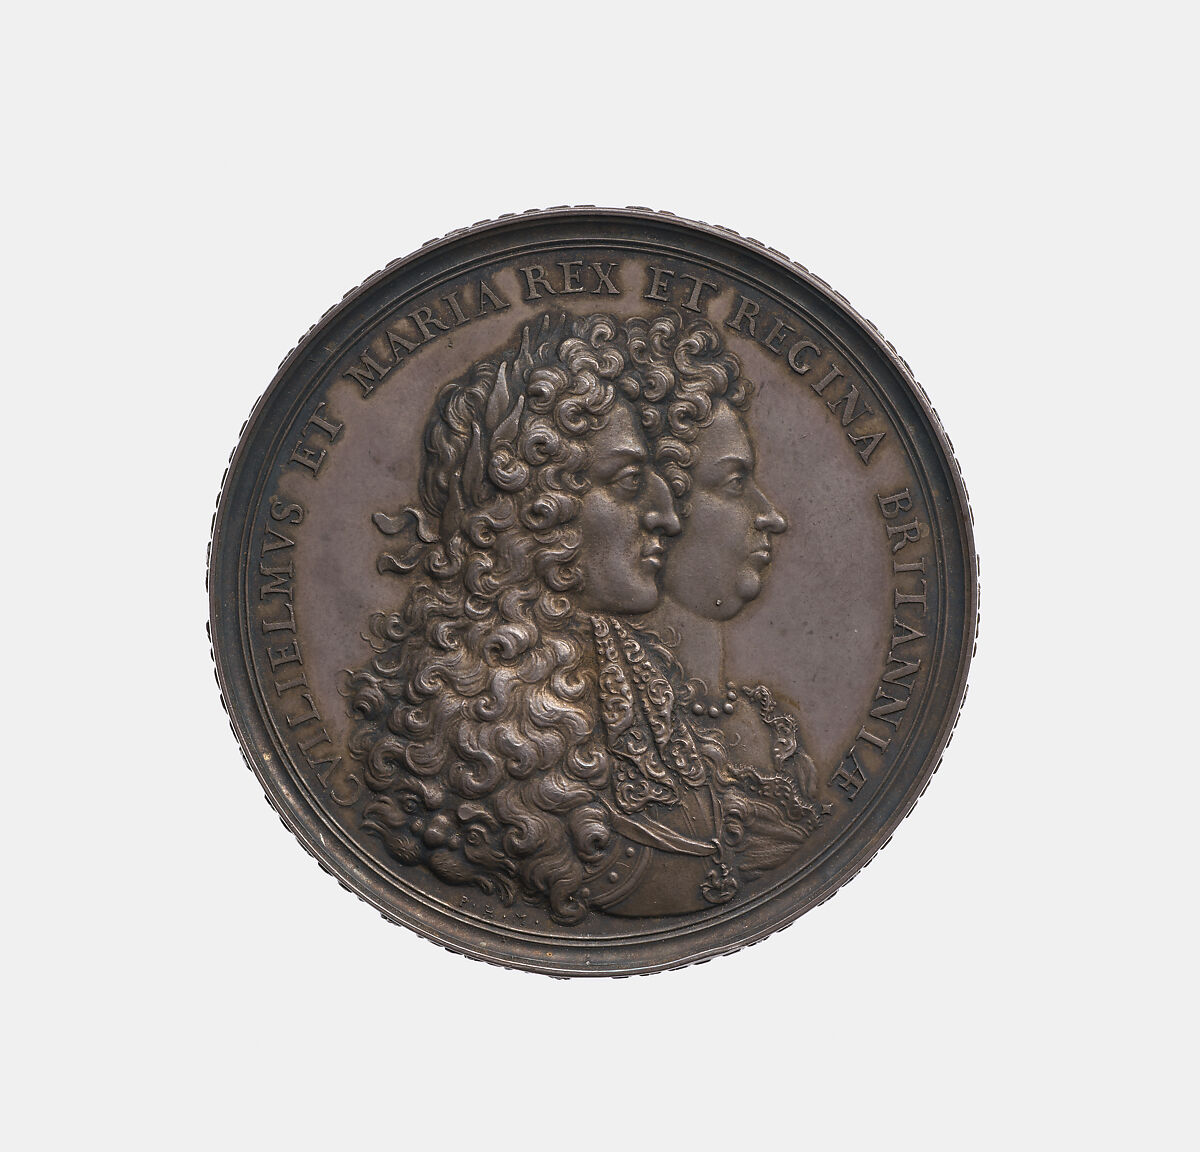 William III 1650-1702, and Mary 1662-94, King and Queen of England 1688-94, Philipp Heinrich Mueller (German, Augsburg, 1654–1719), Silver, German, Augsburg 